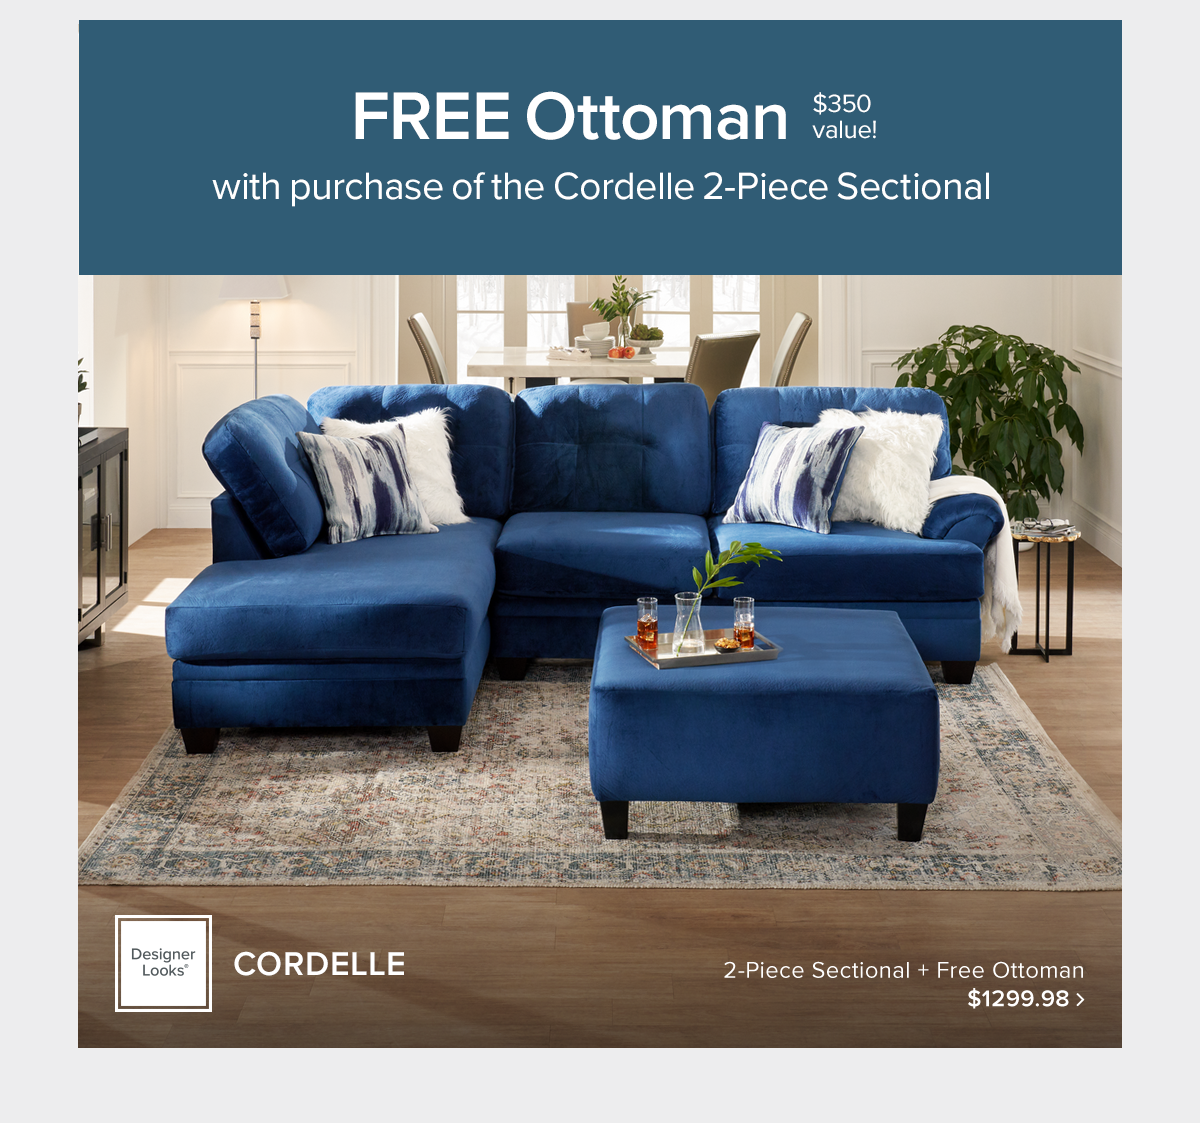 Free Ottoman with purchase of the Cordelle 2-Piece Sectional